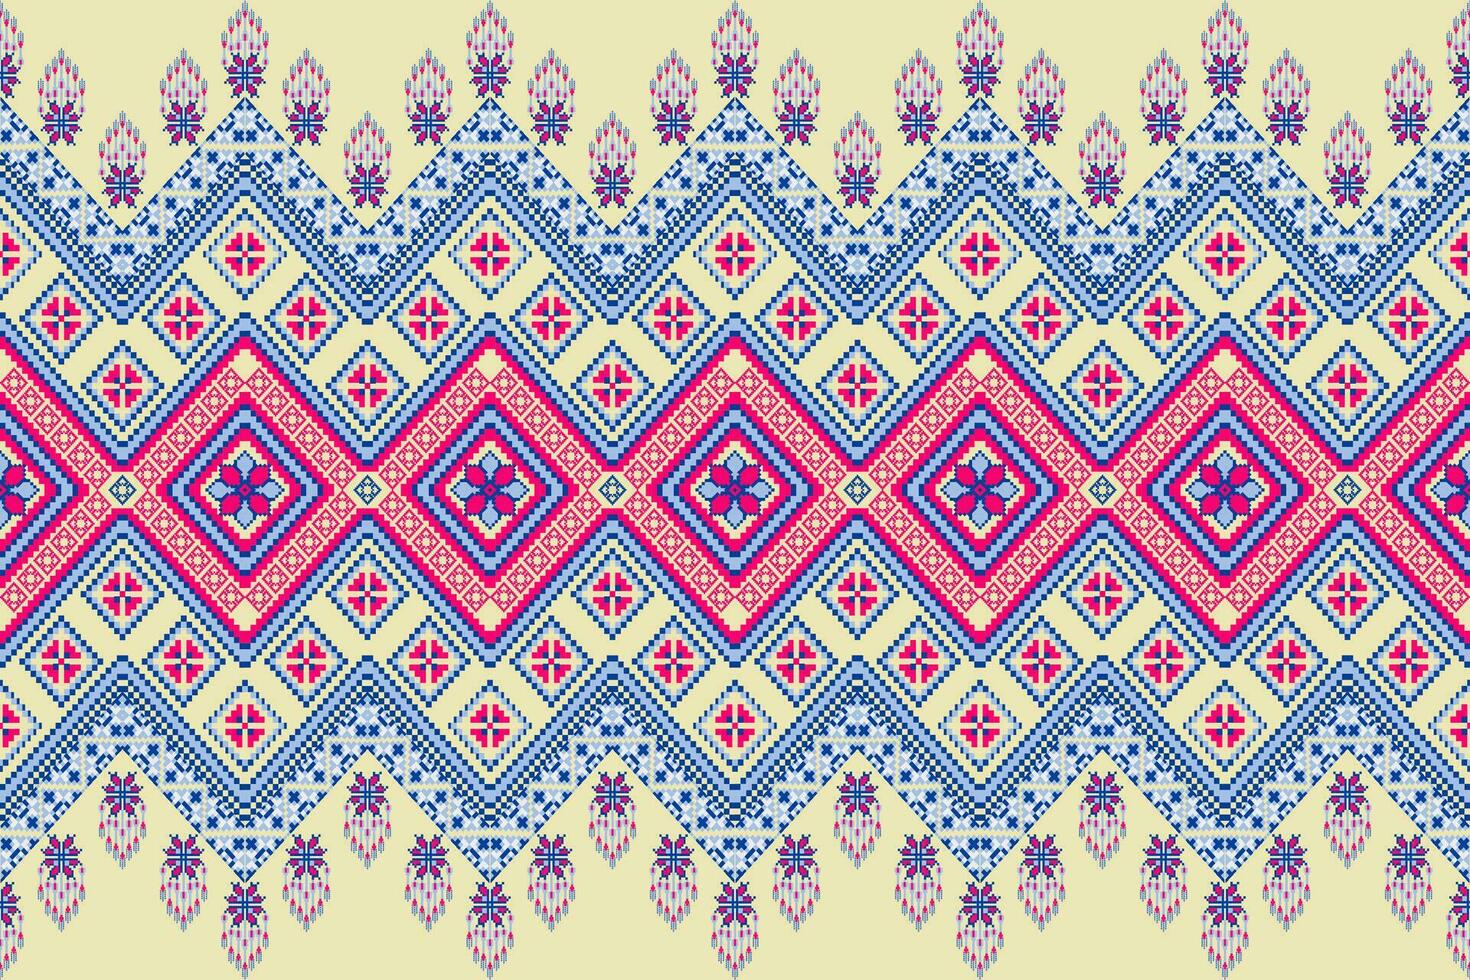 Traditional ethnic diagonal pixel art seamless pattern. Vector design for fabric, embroidery, tile, carpet, wrapping, wallpaper, and background